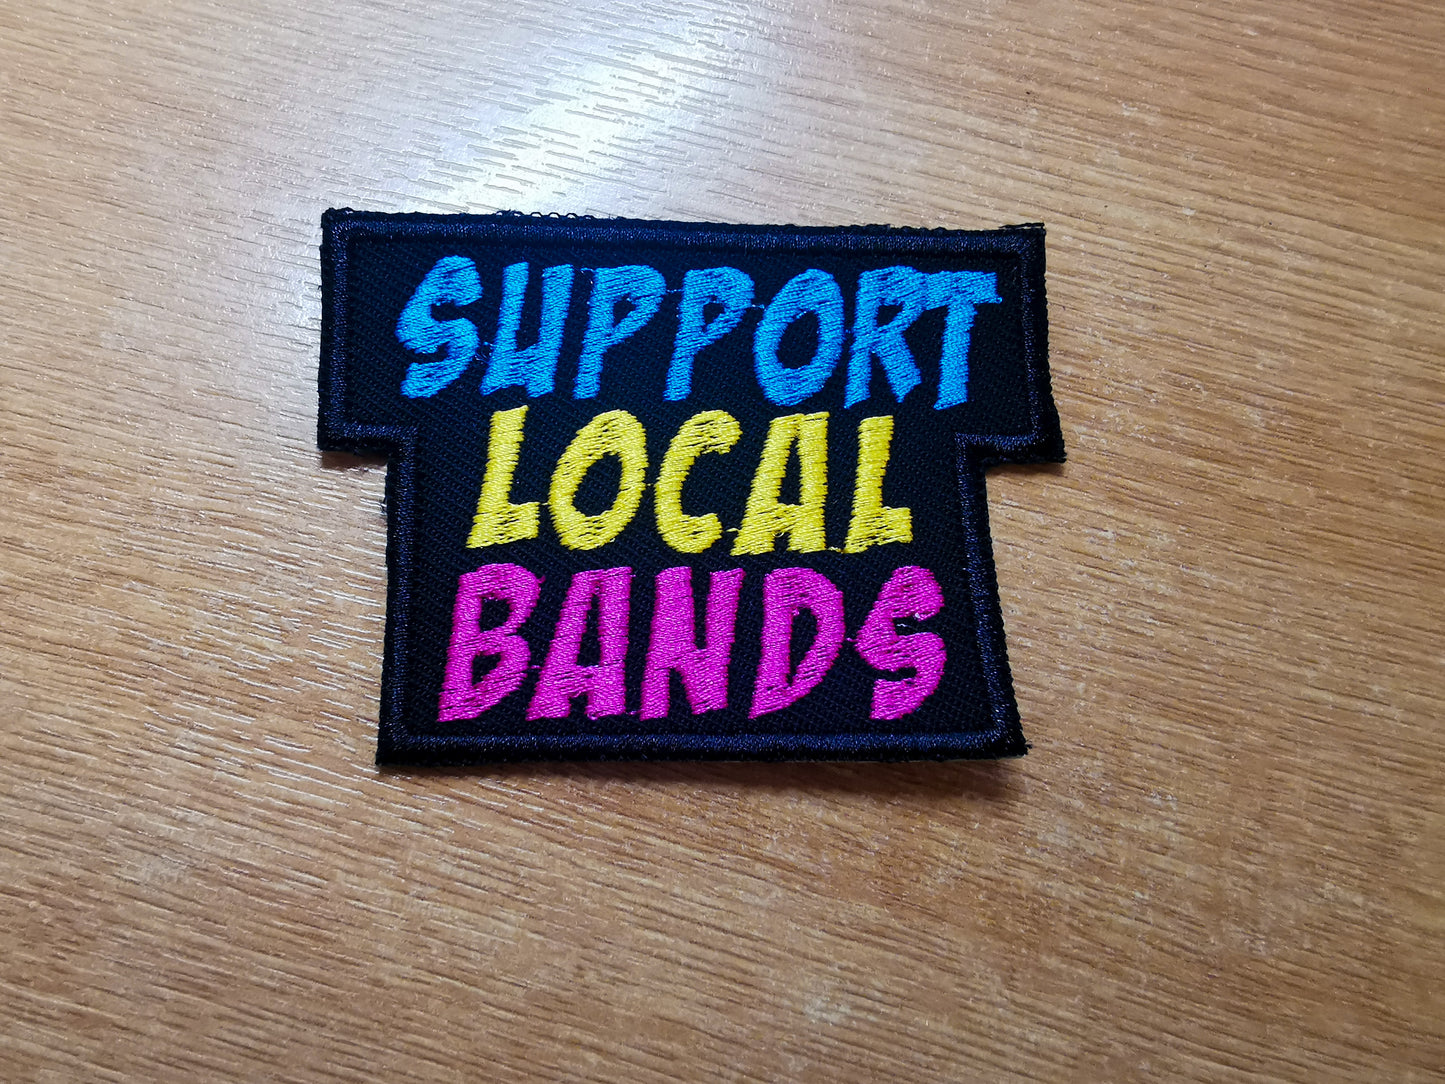 Support Local Bands Embroidered Patch Vibrant Blue Yellow Fuschia